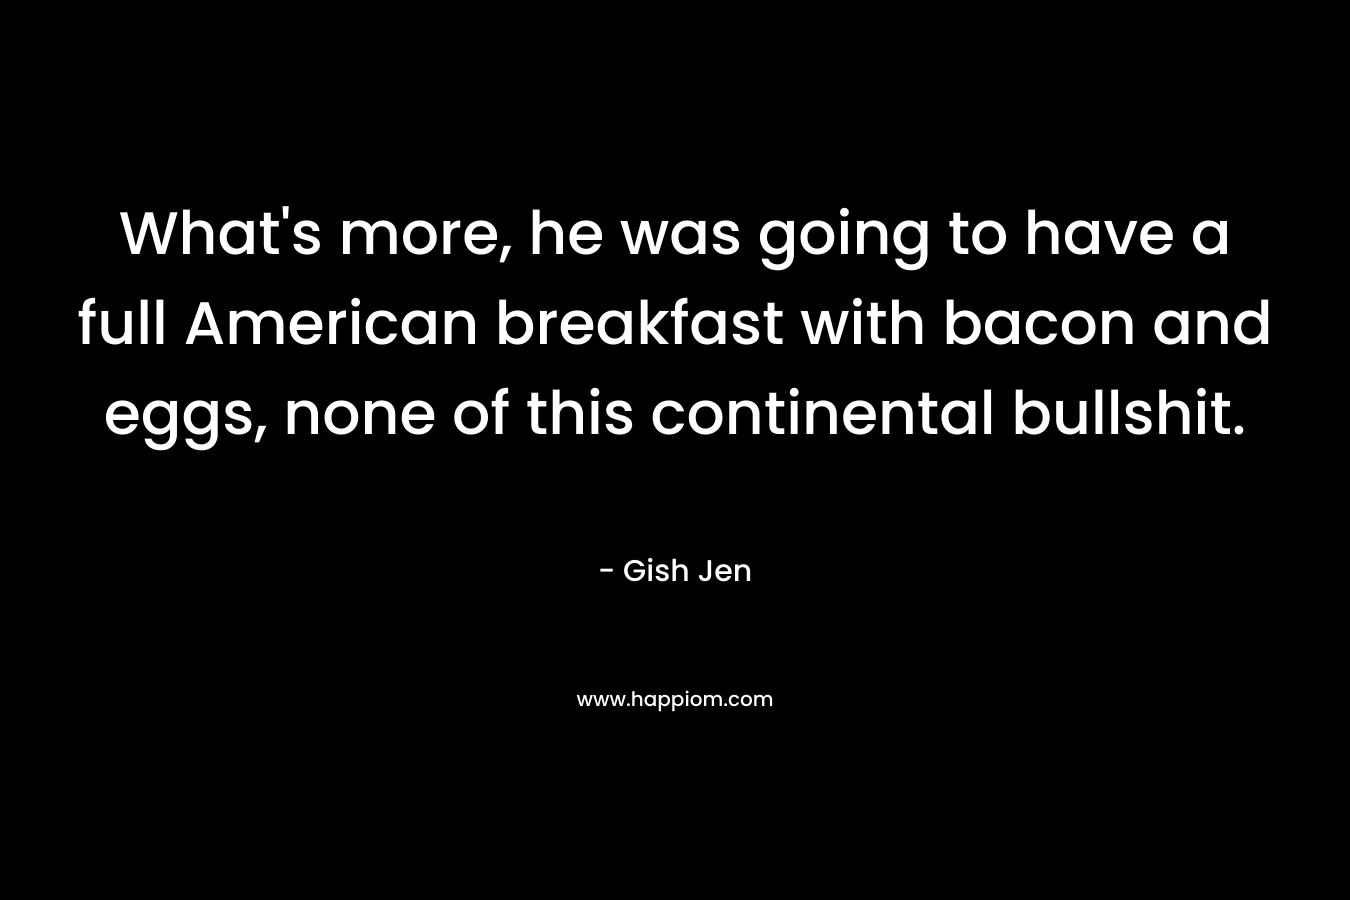 What’s more, he was going to have a full American breakfast with bacon and eggs, none of this continental bullshit. – Gish Jen